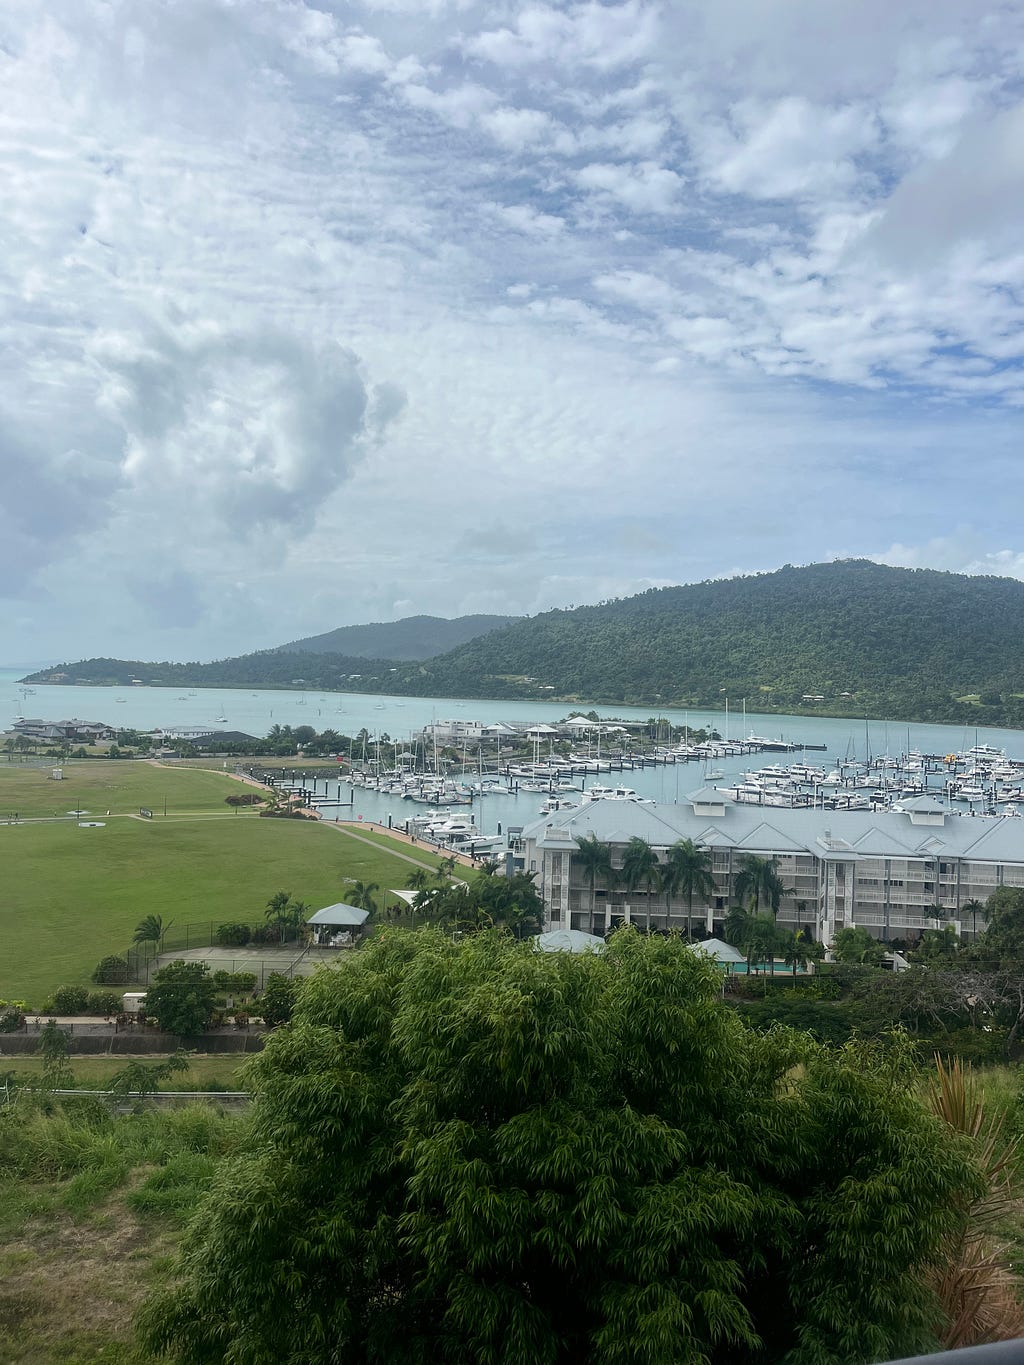 Panoramic view from balcony at Whitsunday Terraces showcasing marina and bay, offering breathtaking scenery of Airlie Beach, Queensland, Australia